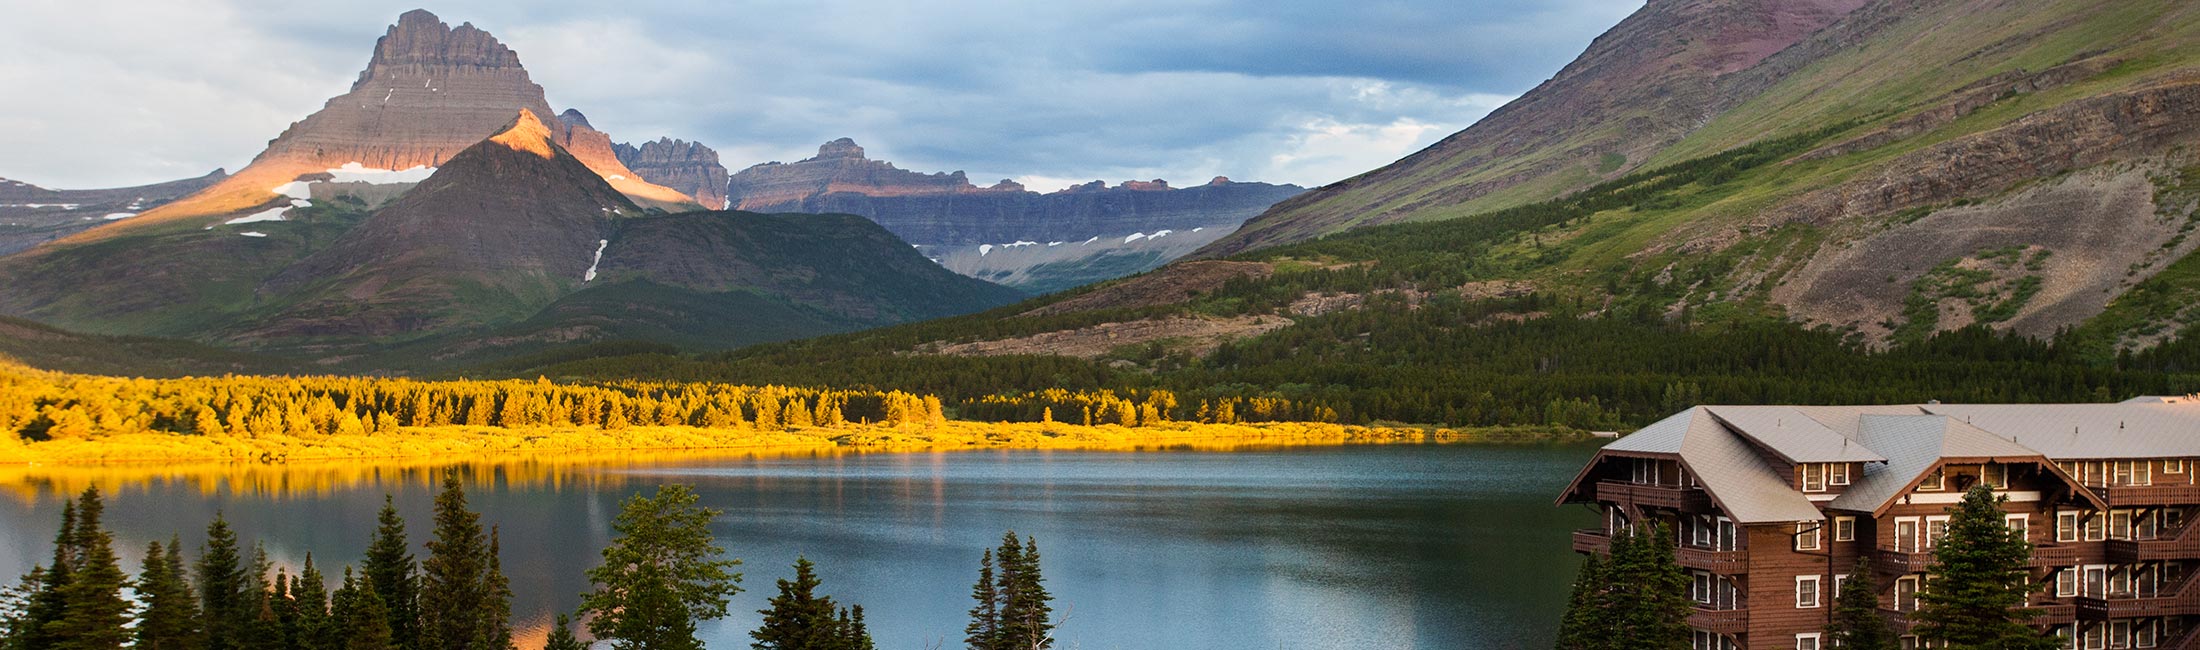 Many Glacier Hotel is surrounded by beautiful fall views in Glacier National Park, Montana. 